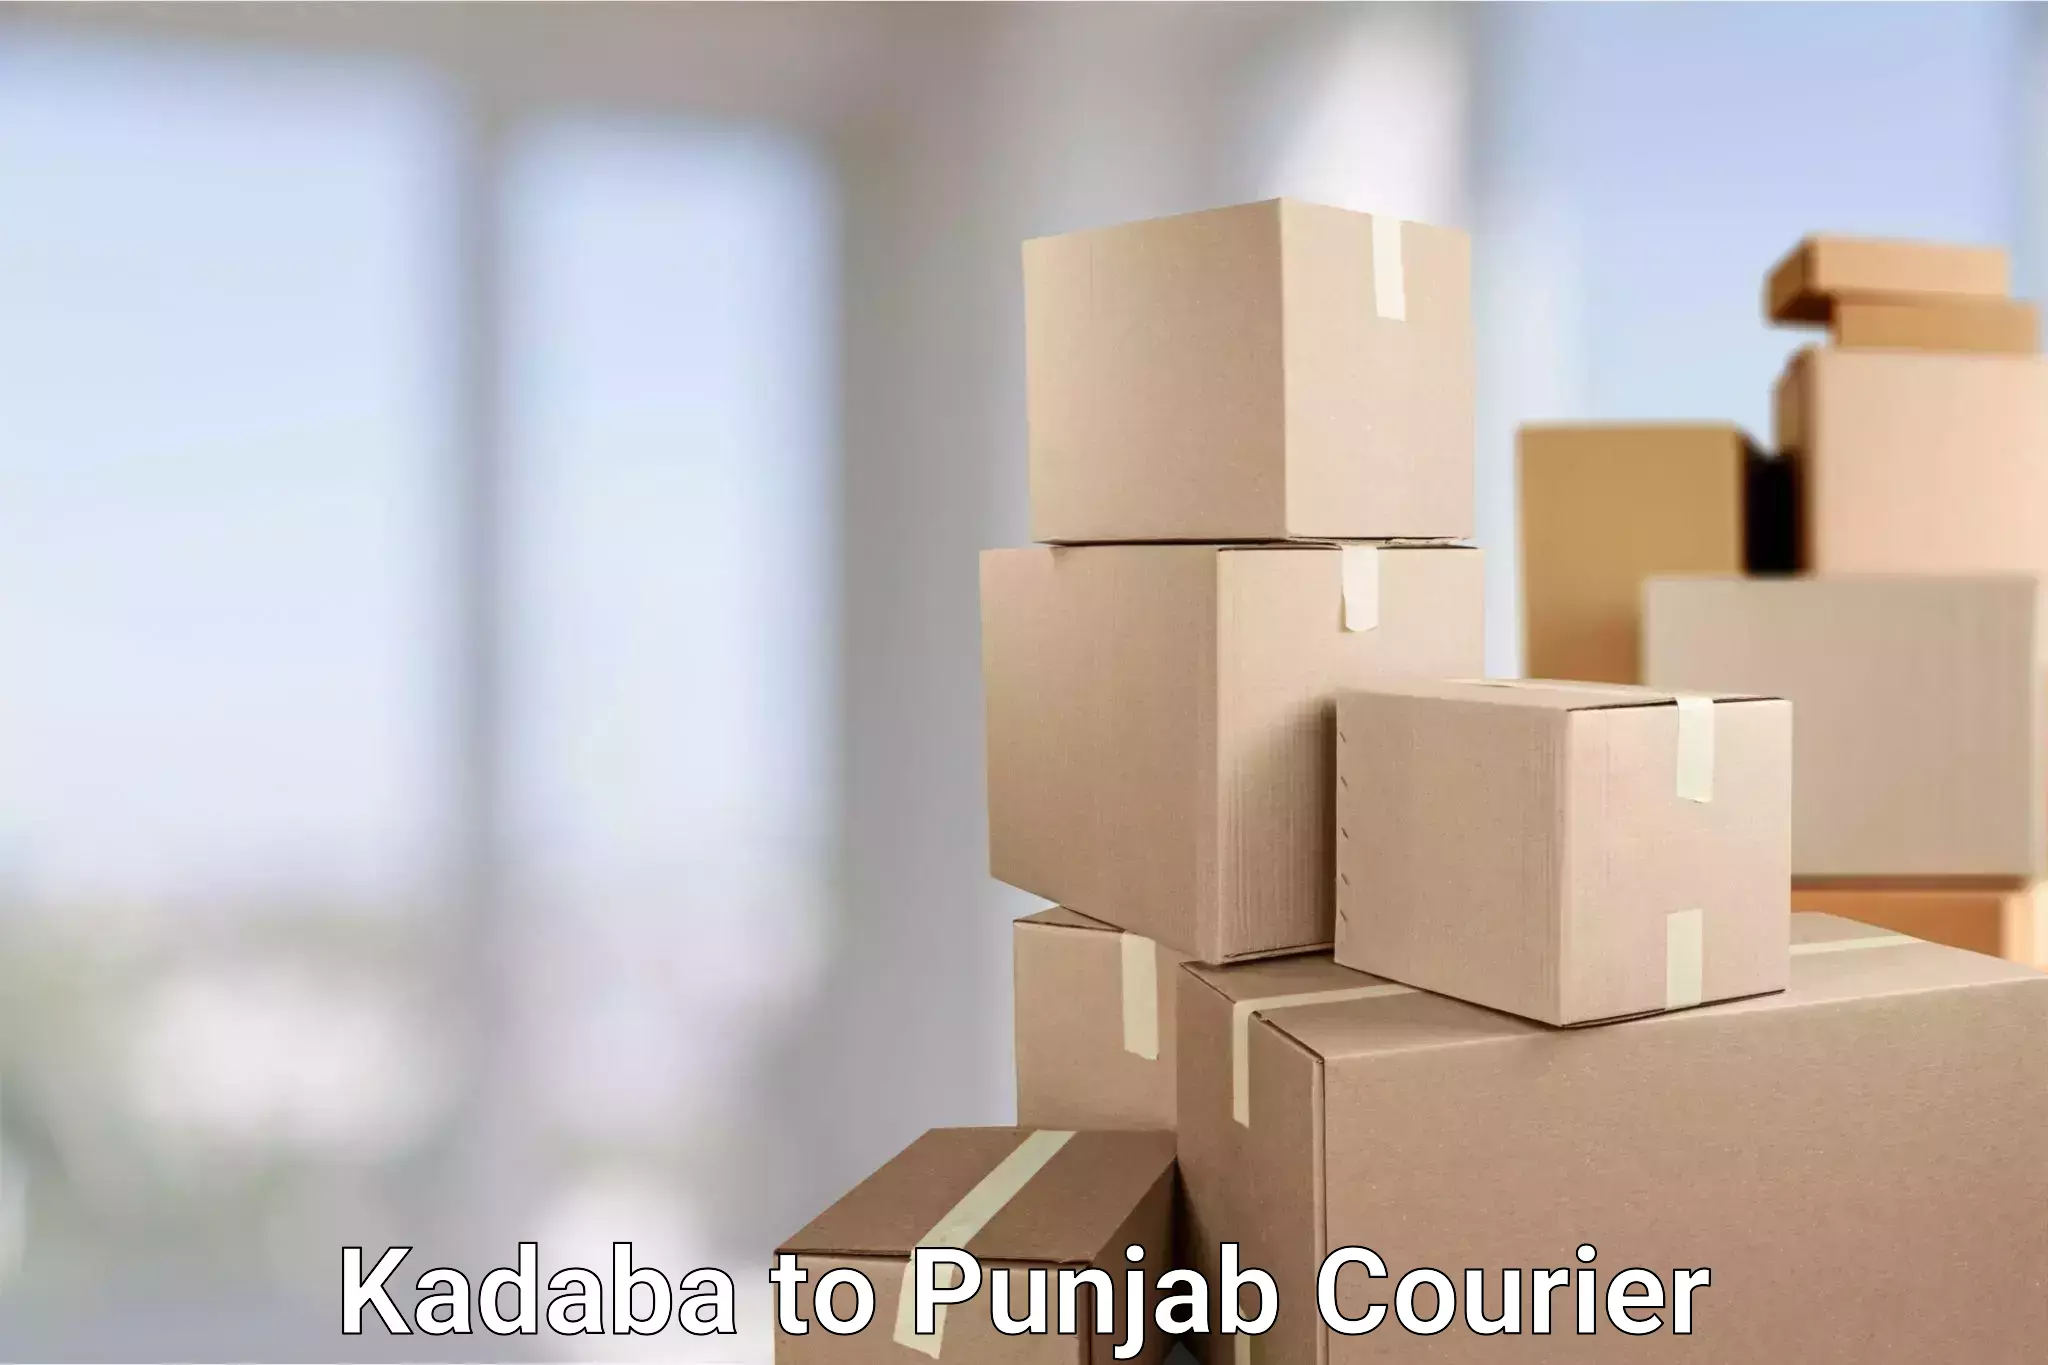 Express delivery network Kadaba to Pathankot